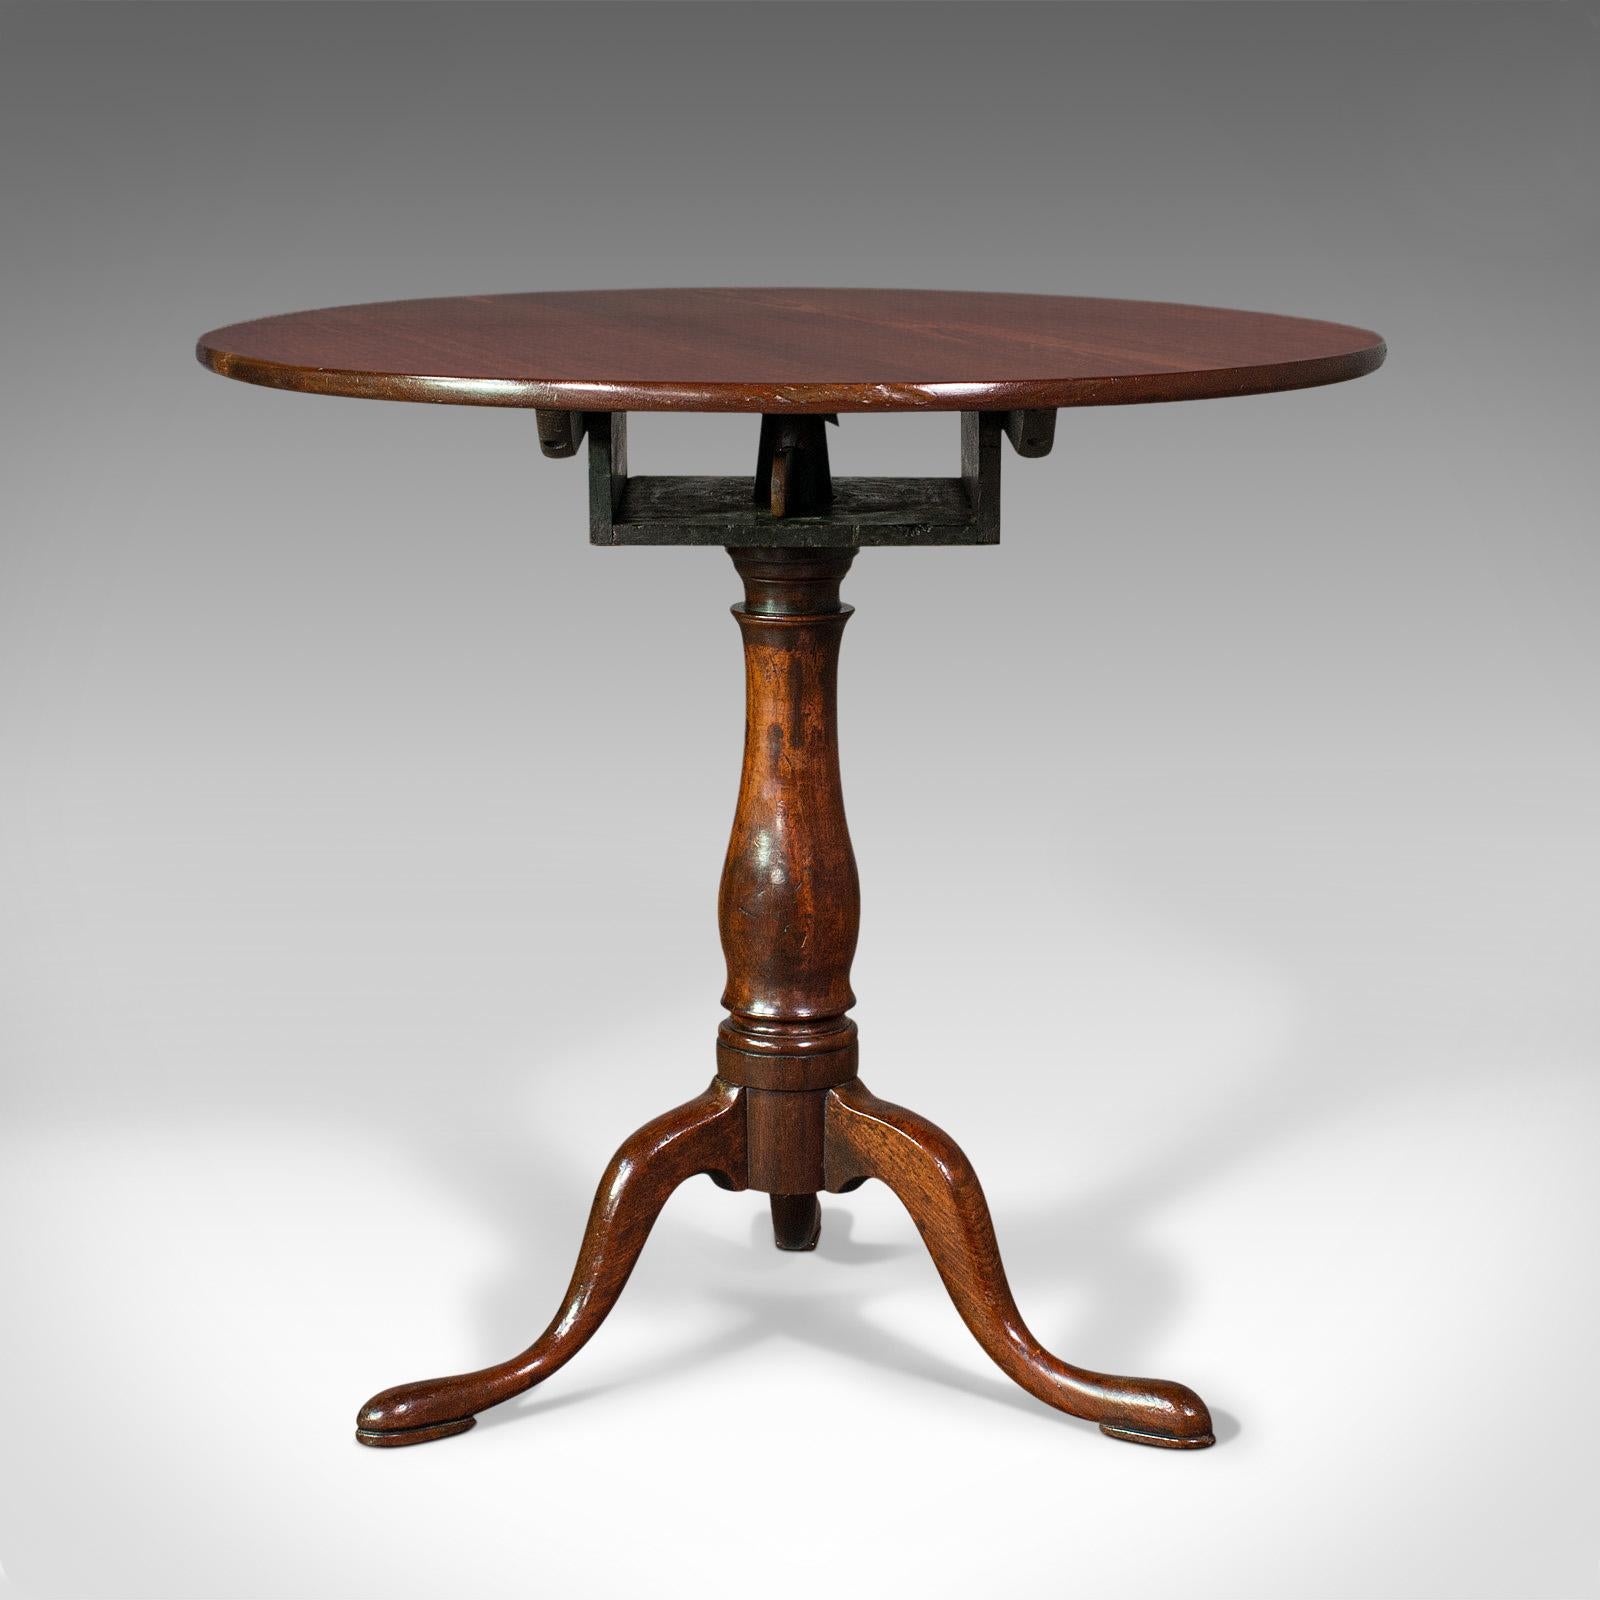 18th Century Antique Tilt Top Table, English, Mahogany, Occasional, Wine, Georgian, C.1780 For Sale